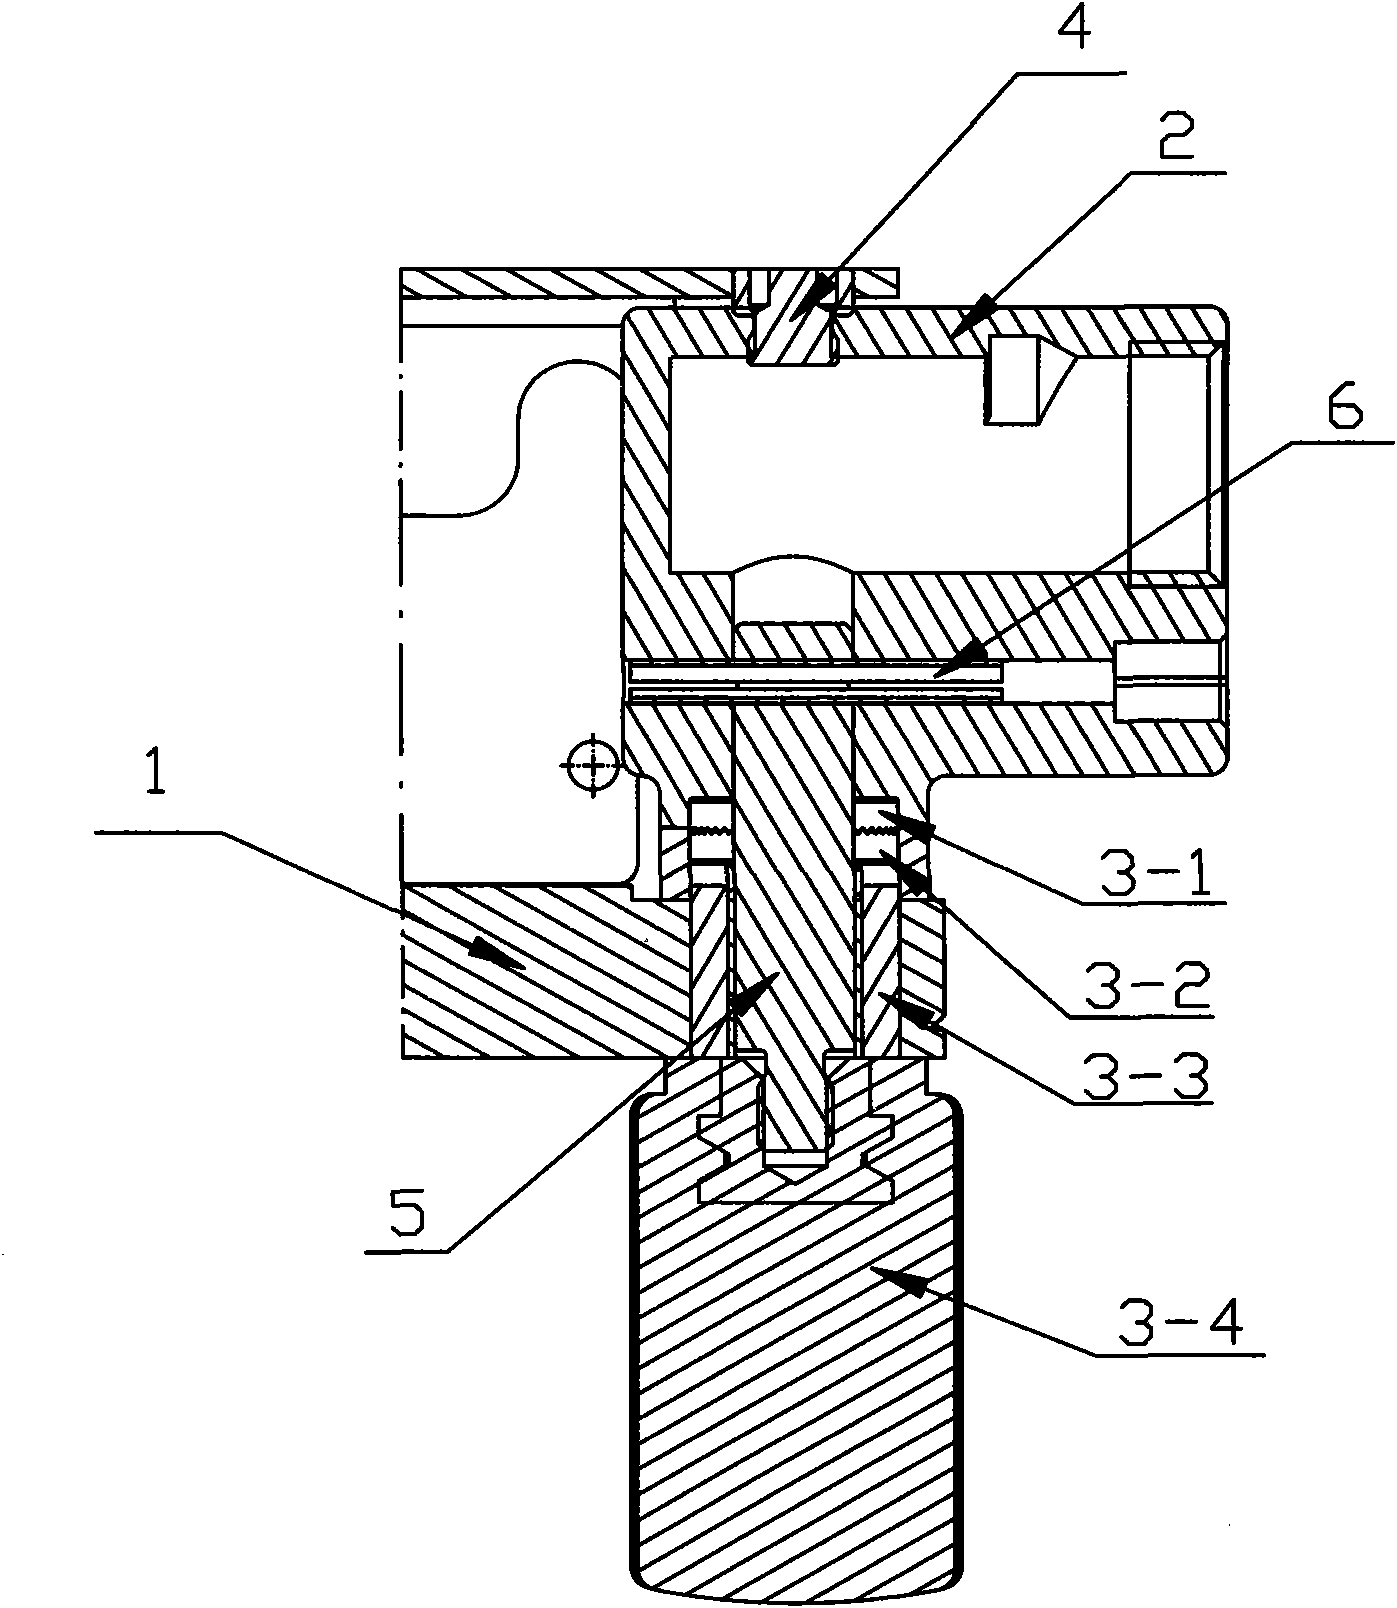 Connecting structure for seat plate and leg plate of operating table